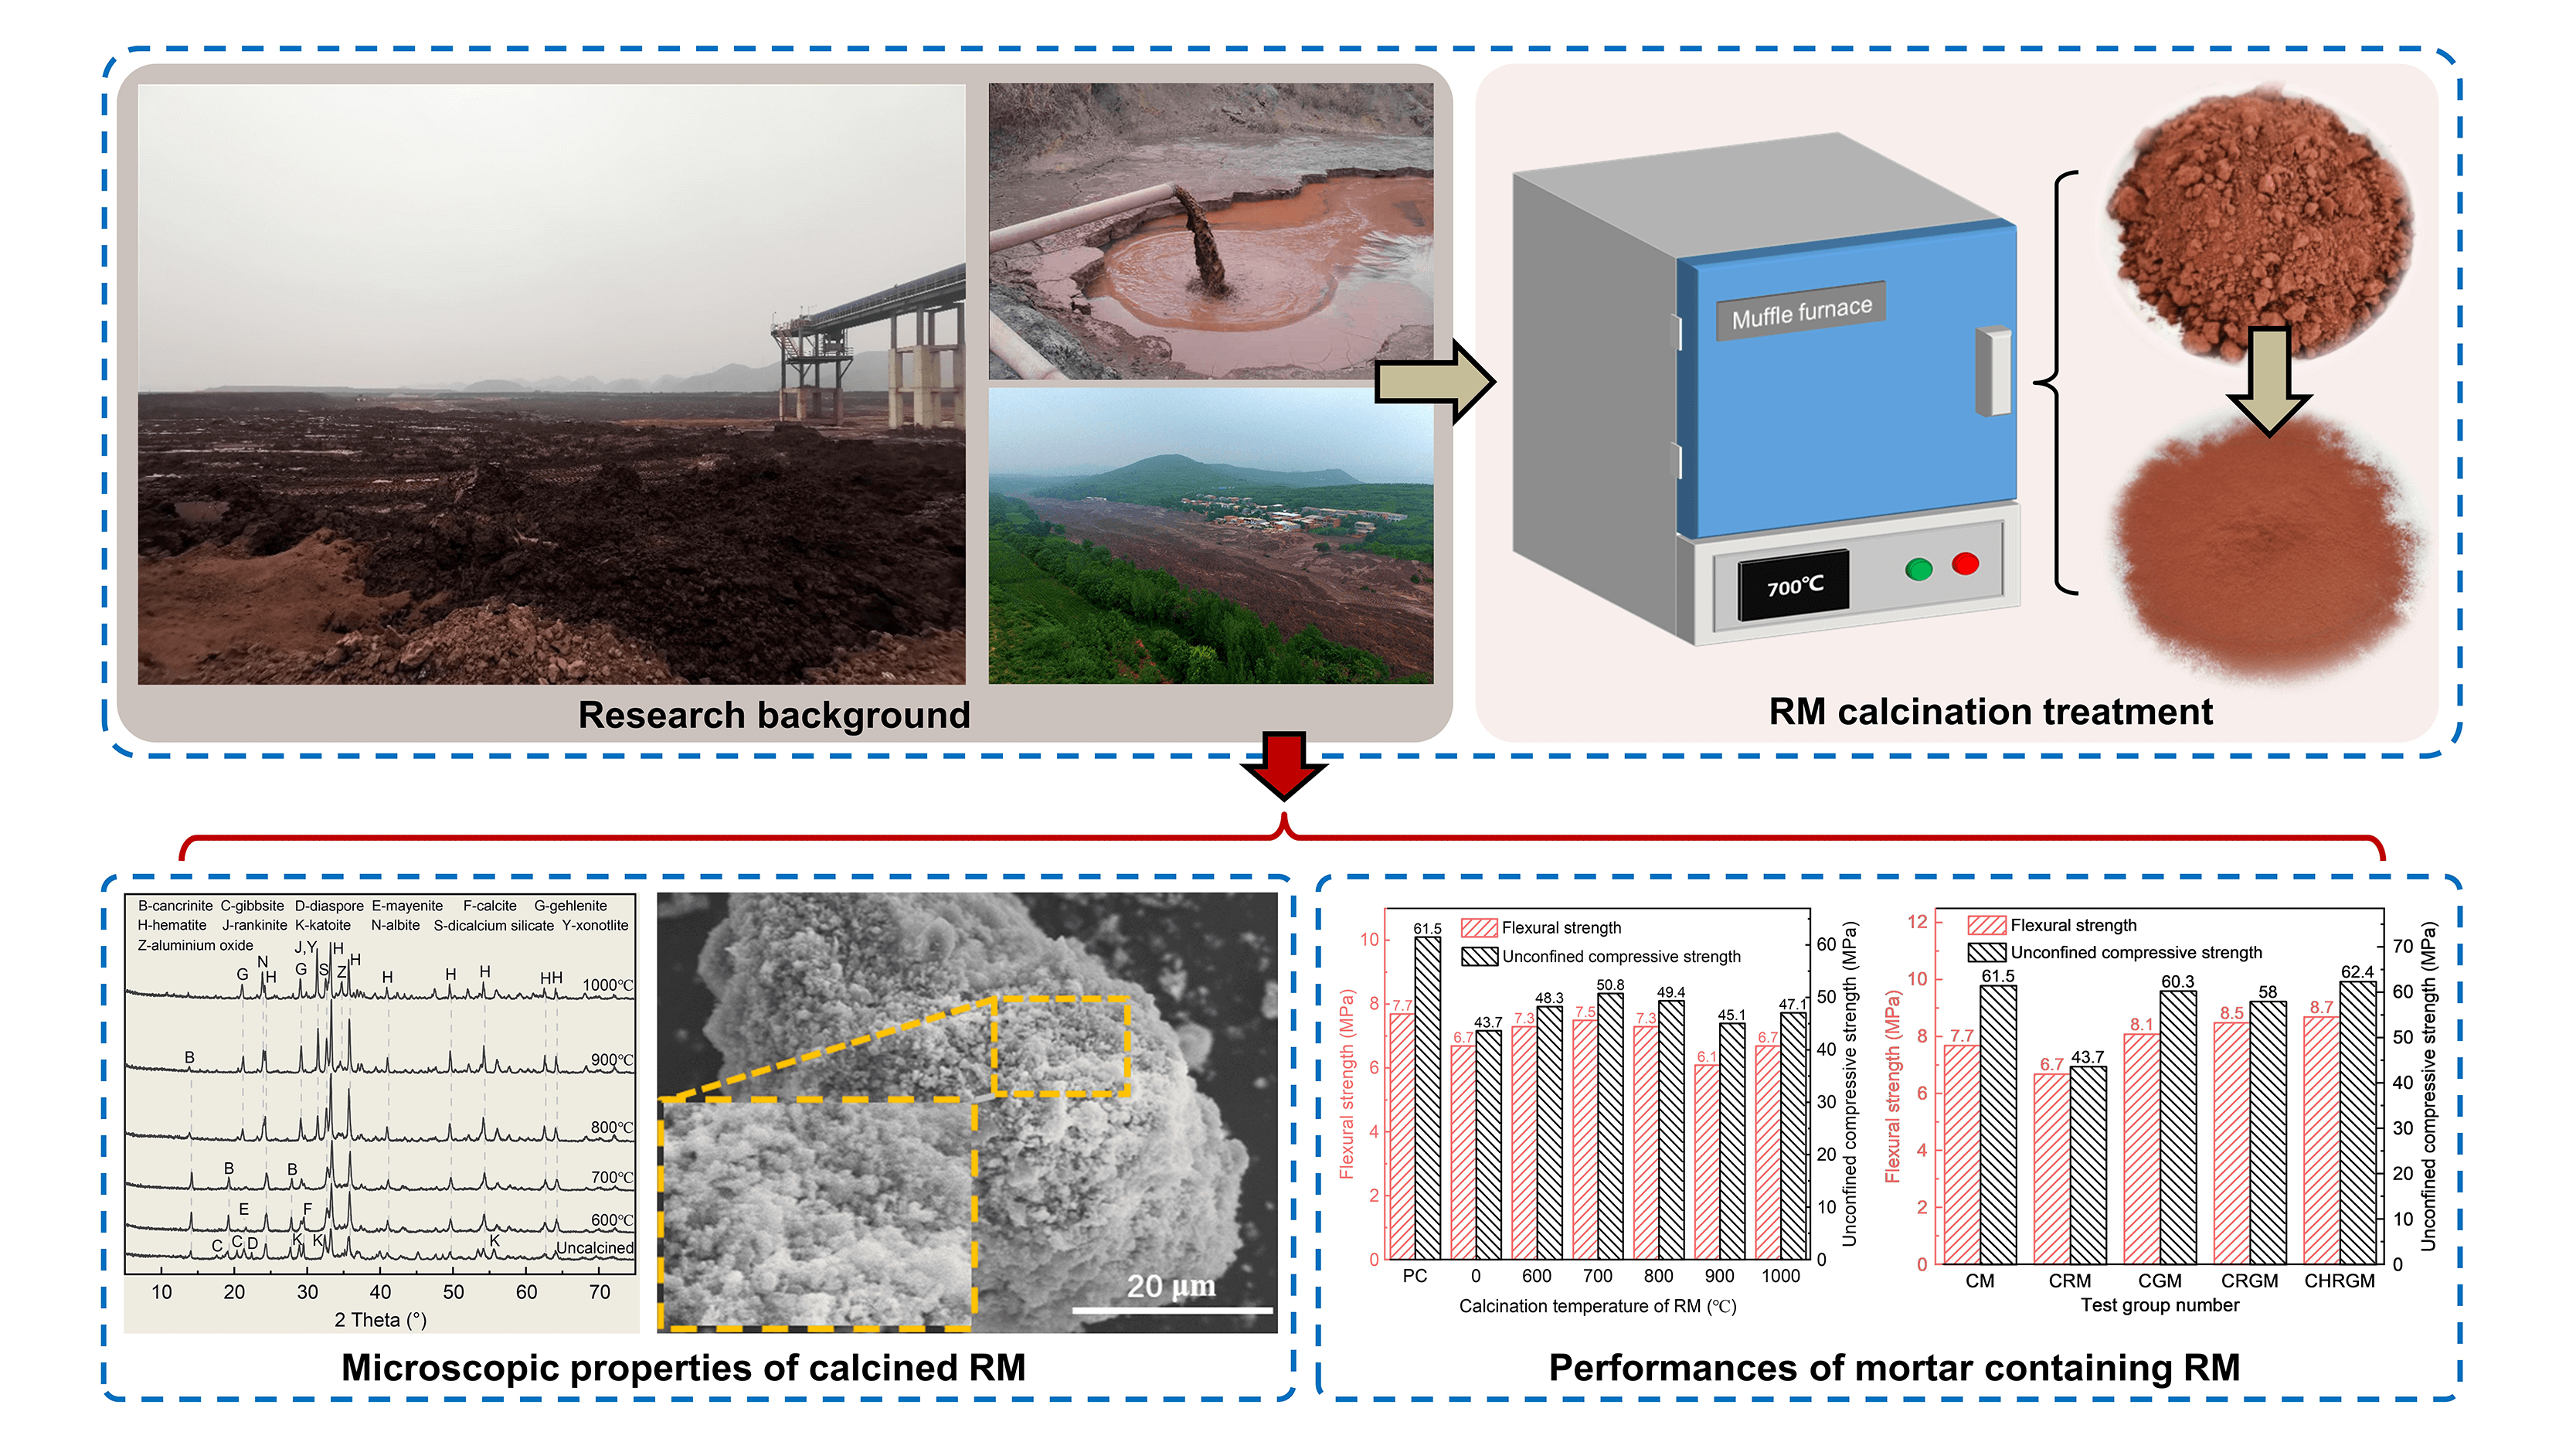 Analysis of Calcined Red Mud Properties and Related Mortar Performances